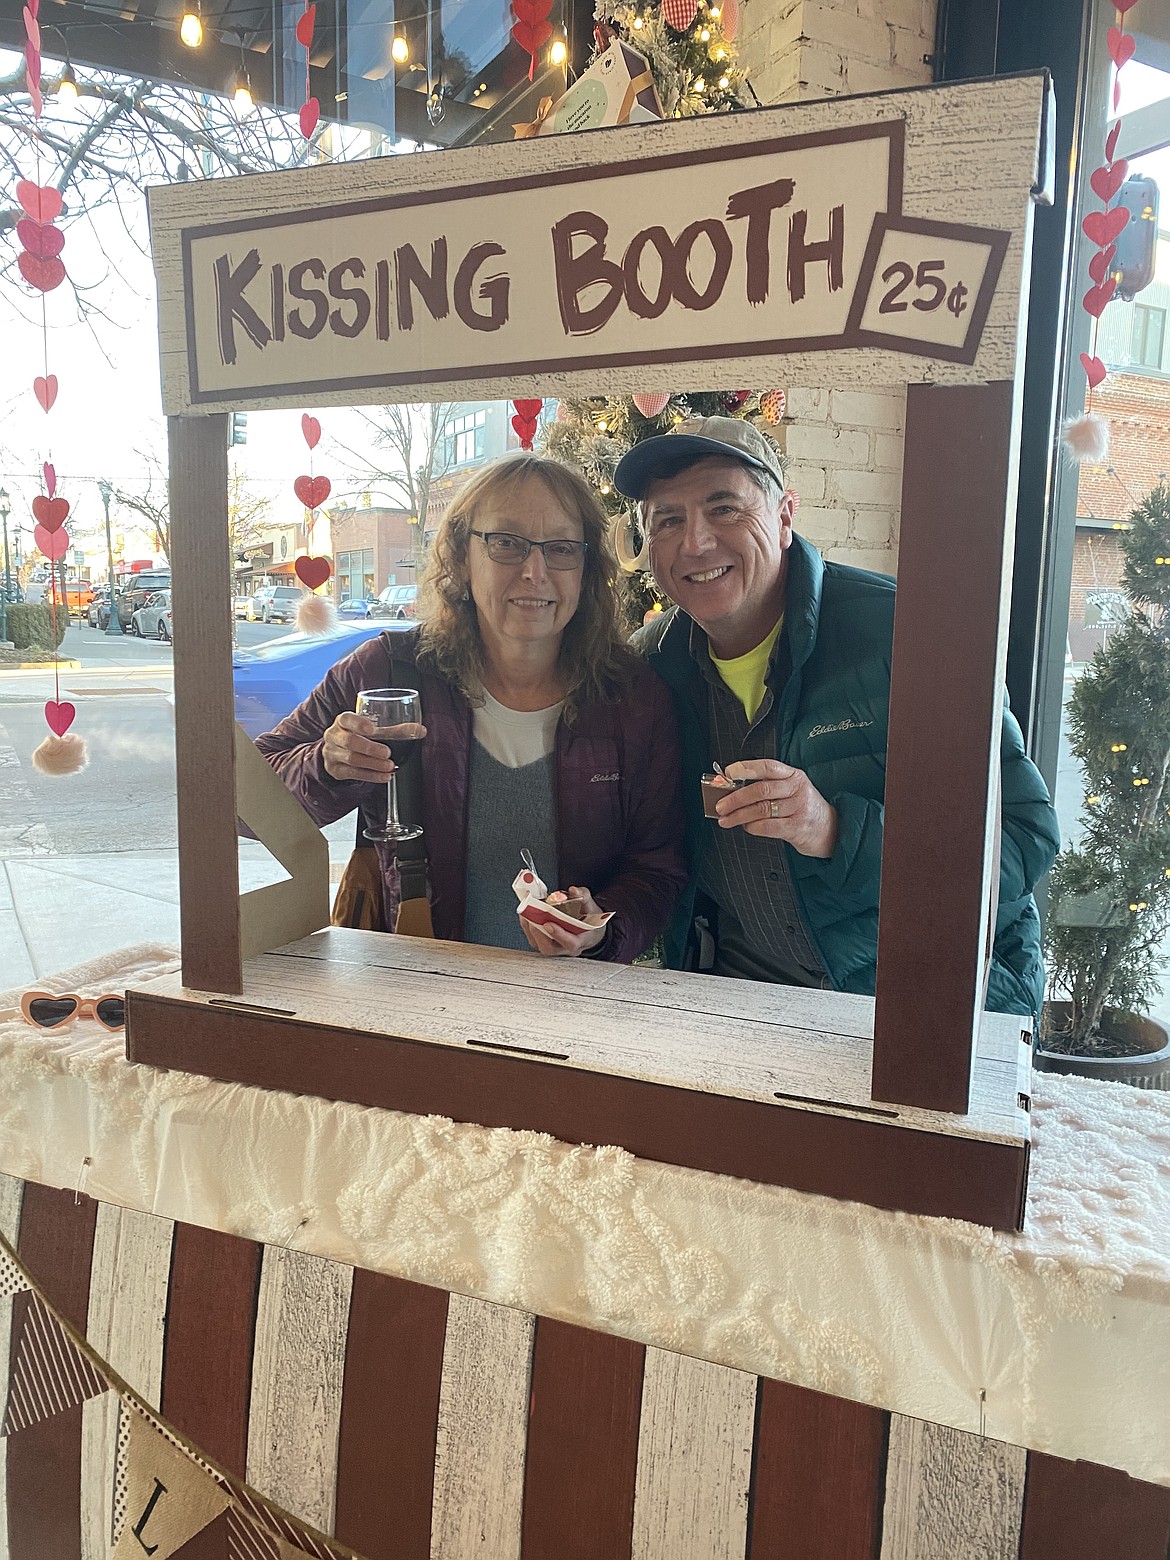 Newlyweds Jim and Kathy McFeeley stopped at the kissing booth at Woops! Bakeshop in downtown Coeur d'Alene Friday night during the Chocolate Affair event.